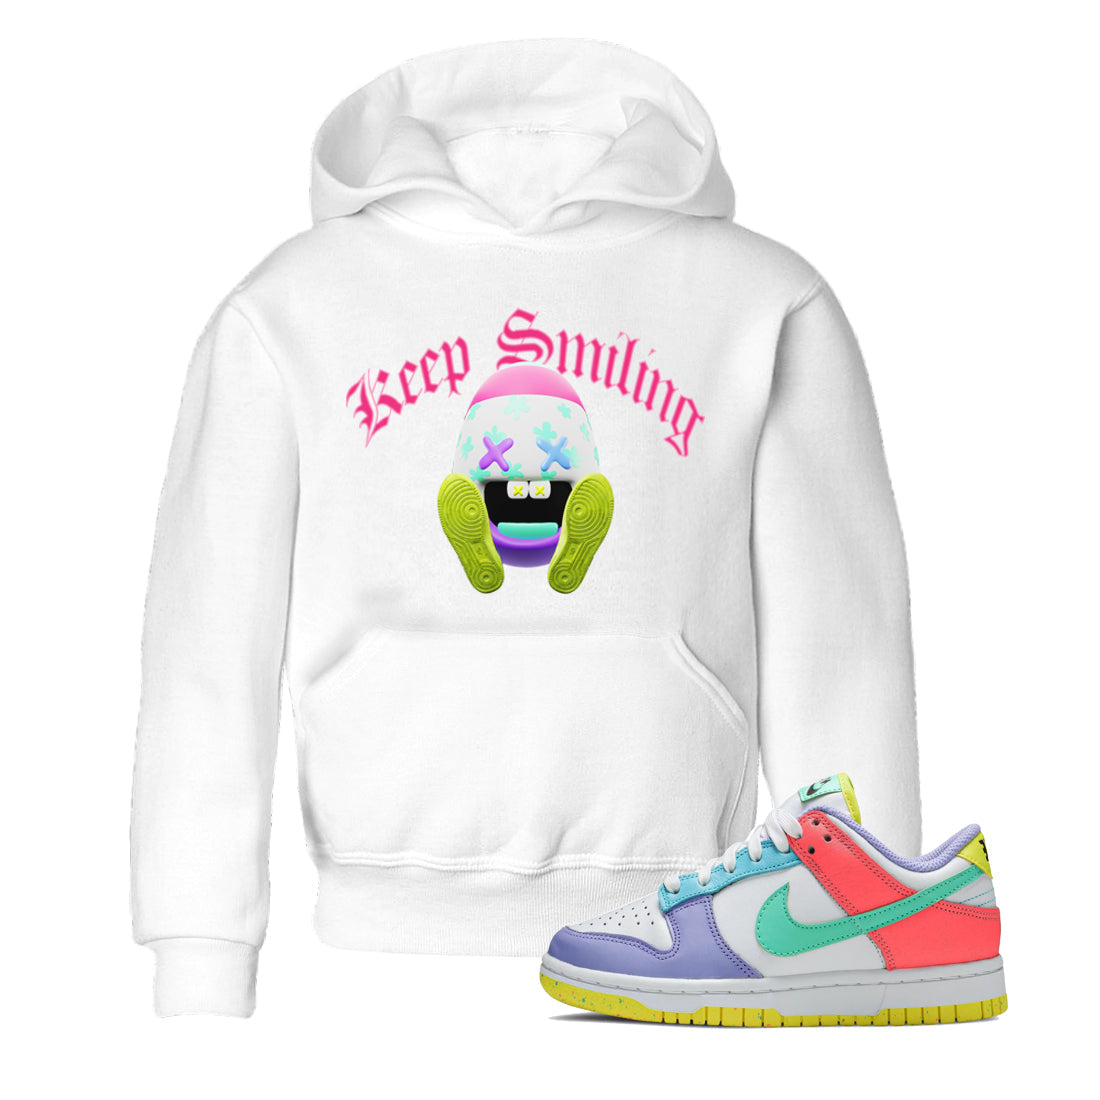 Dunk Easter Candy Sneaker Tees Drip Gear Zone Keep Smiling Sneaker Tees Nike Easter Shirt Kids Shirts White 1